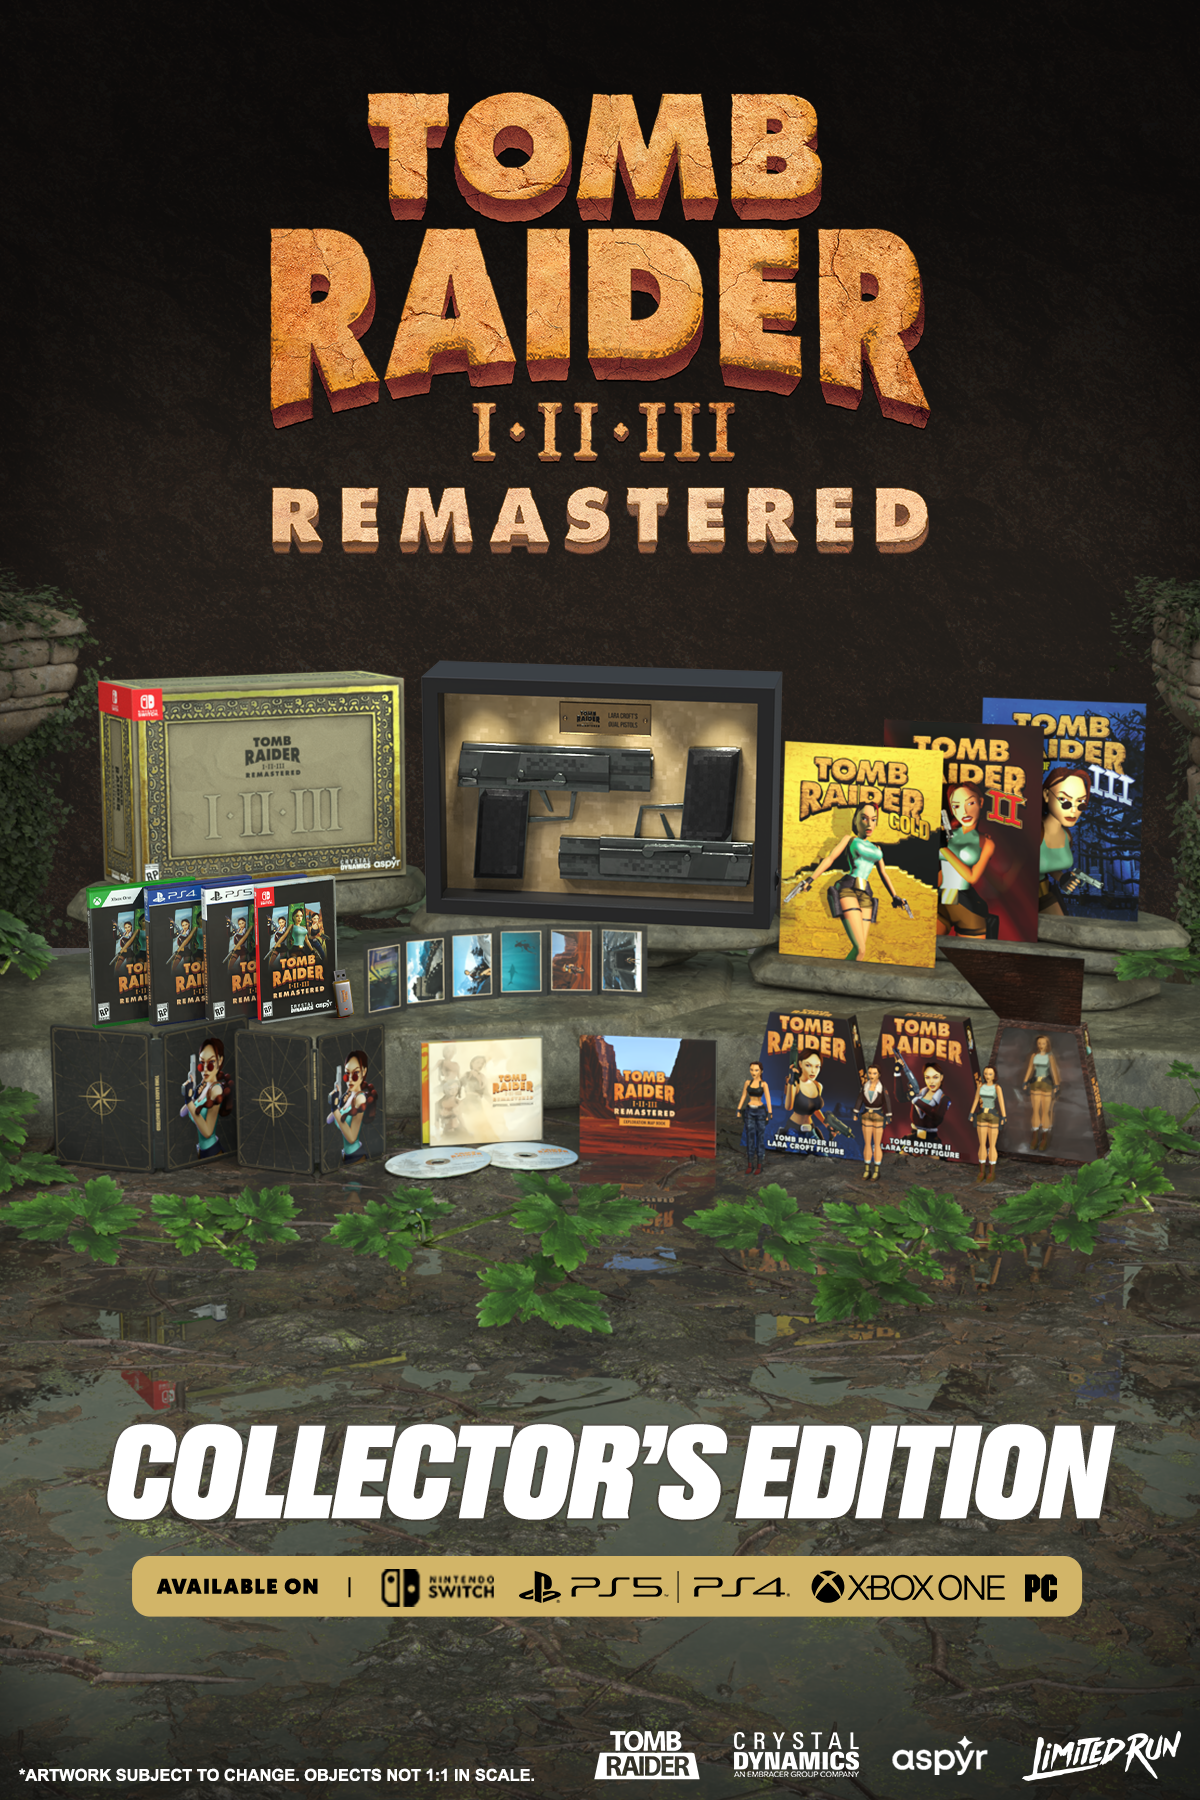 Tomb Raider Remastered Collector's Edition